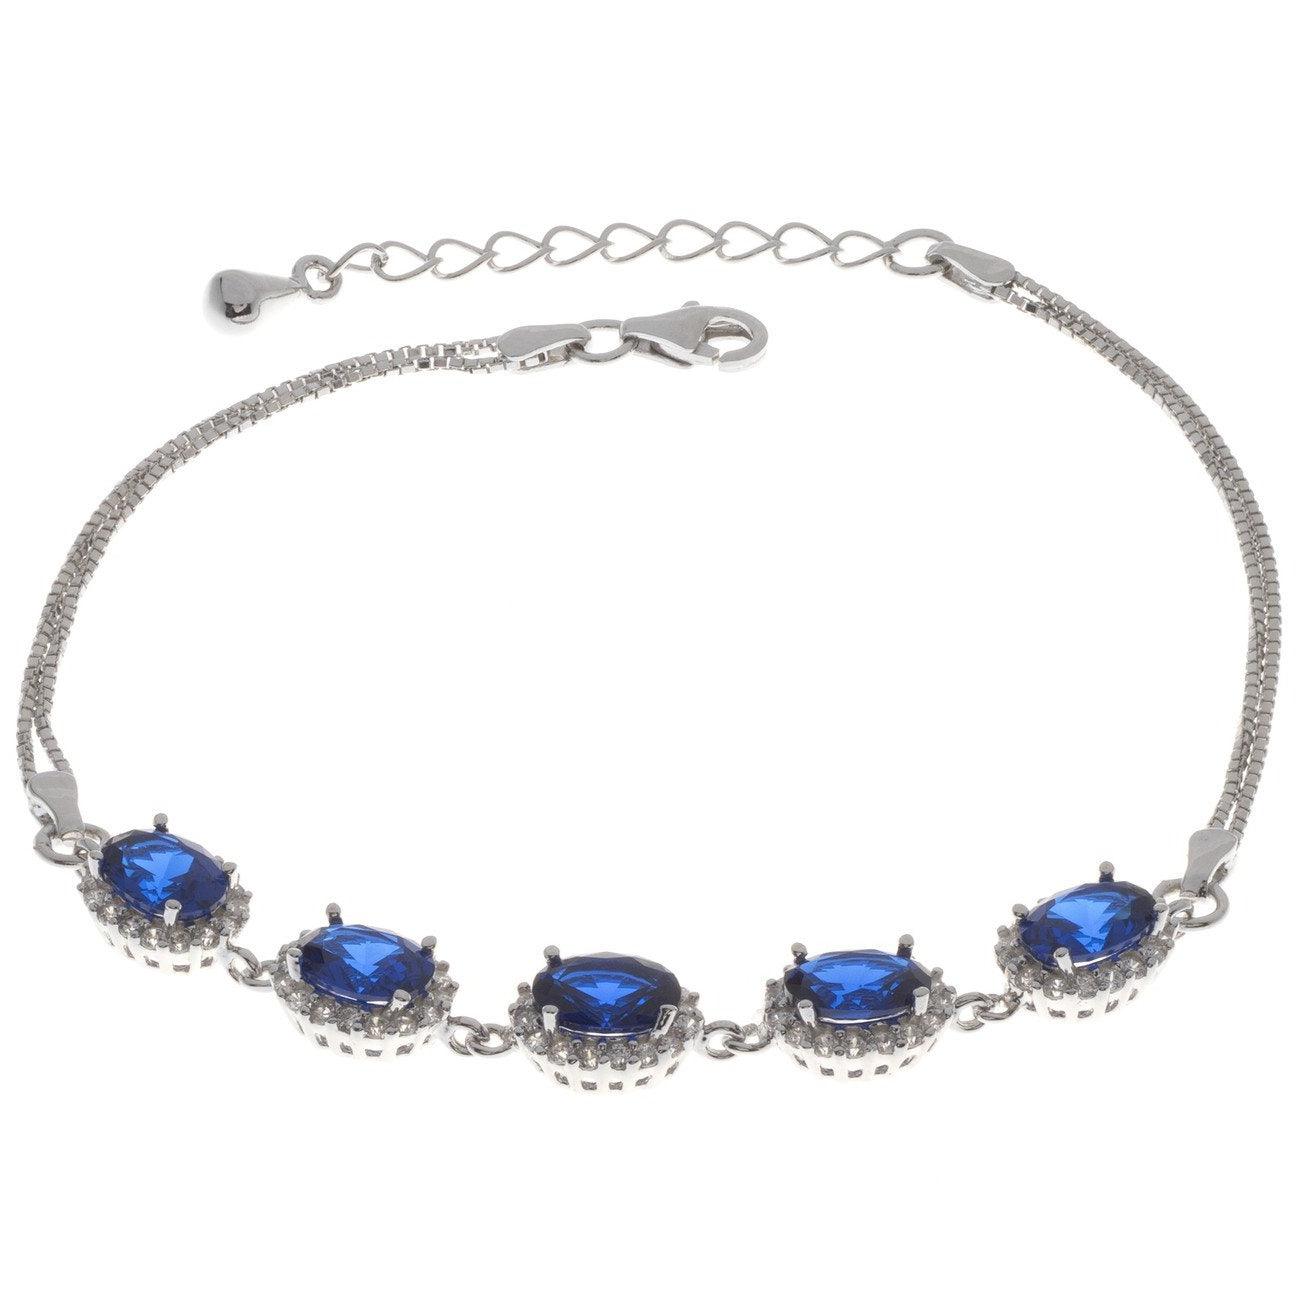 White Rhodium Plated Sterling Silver Bracelet with Synthetic Blue Sapphires, Minar Jewellers